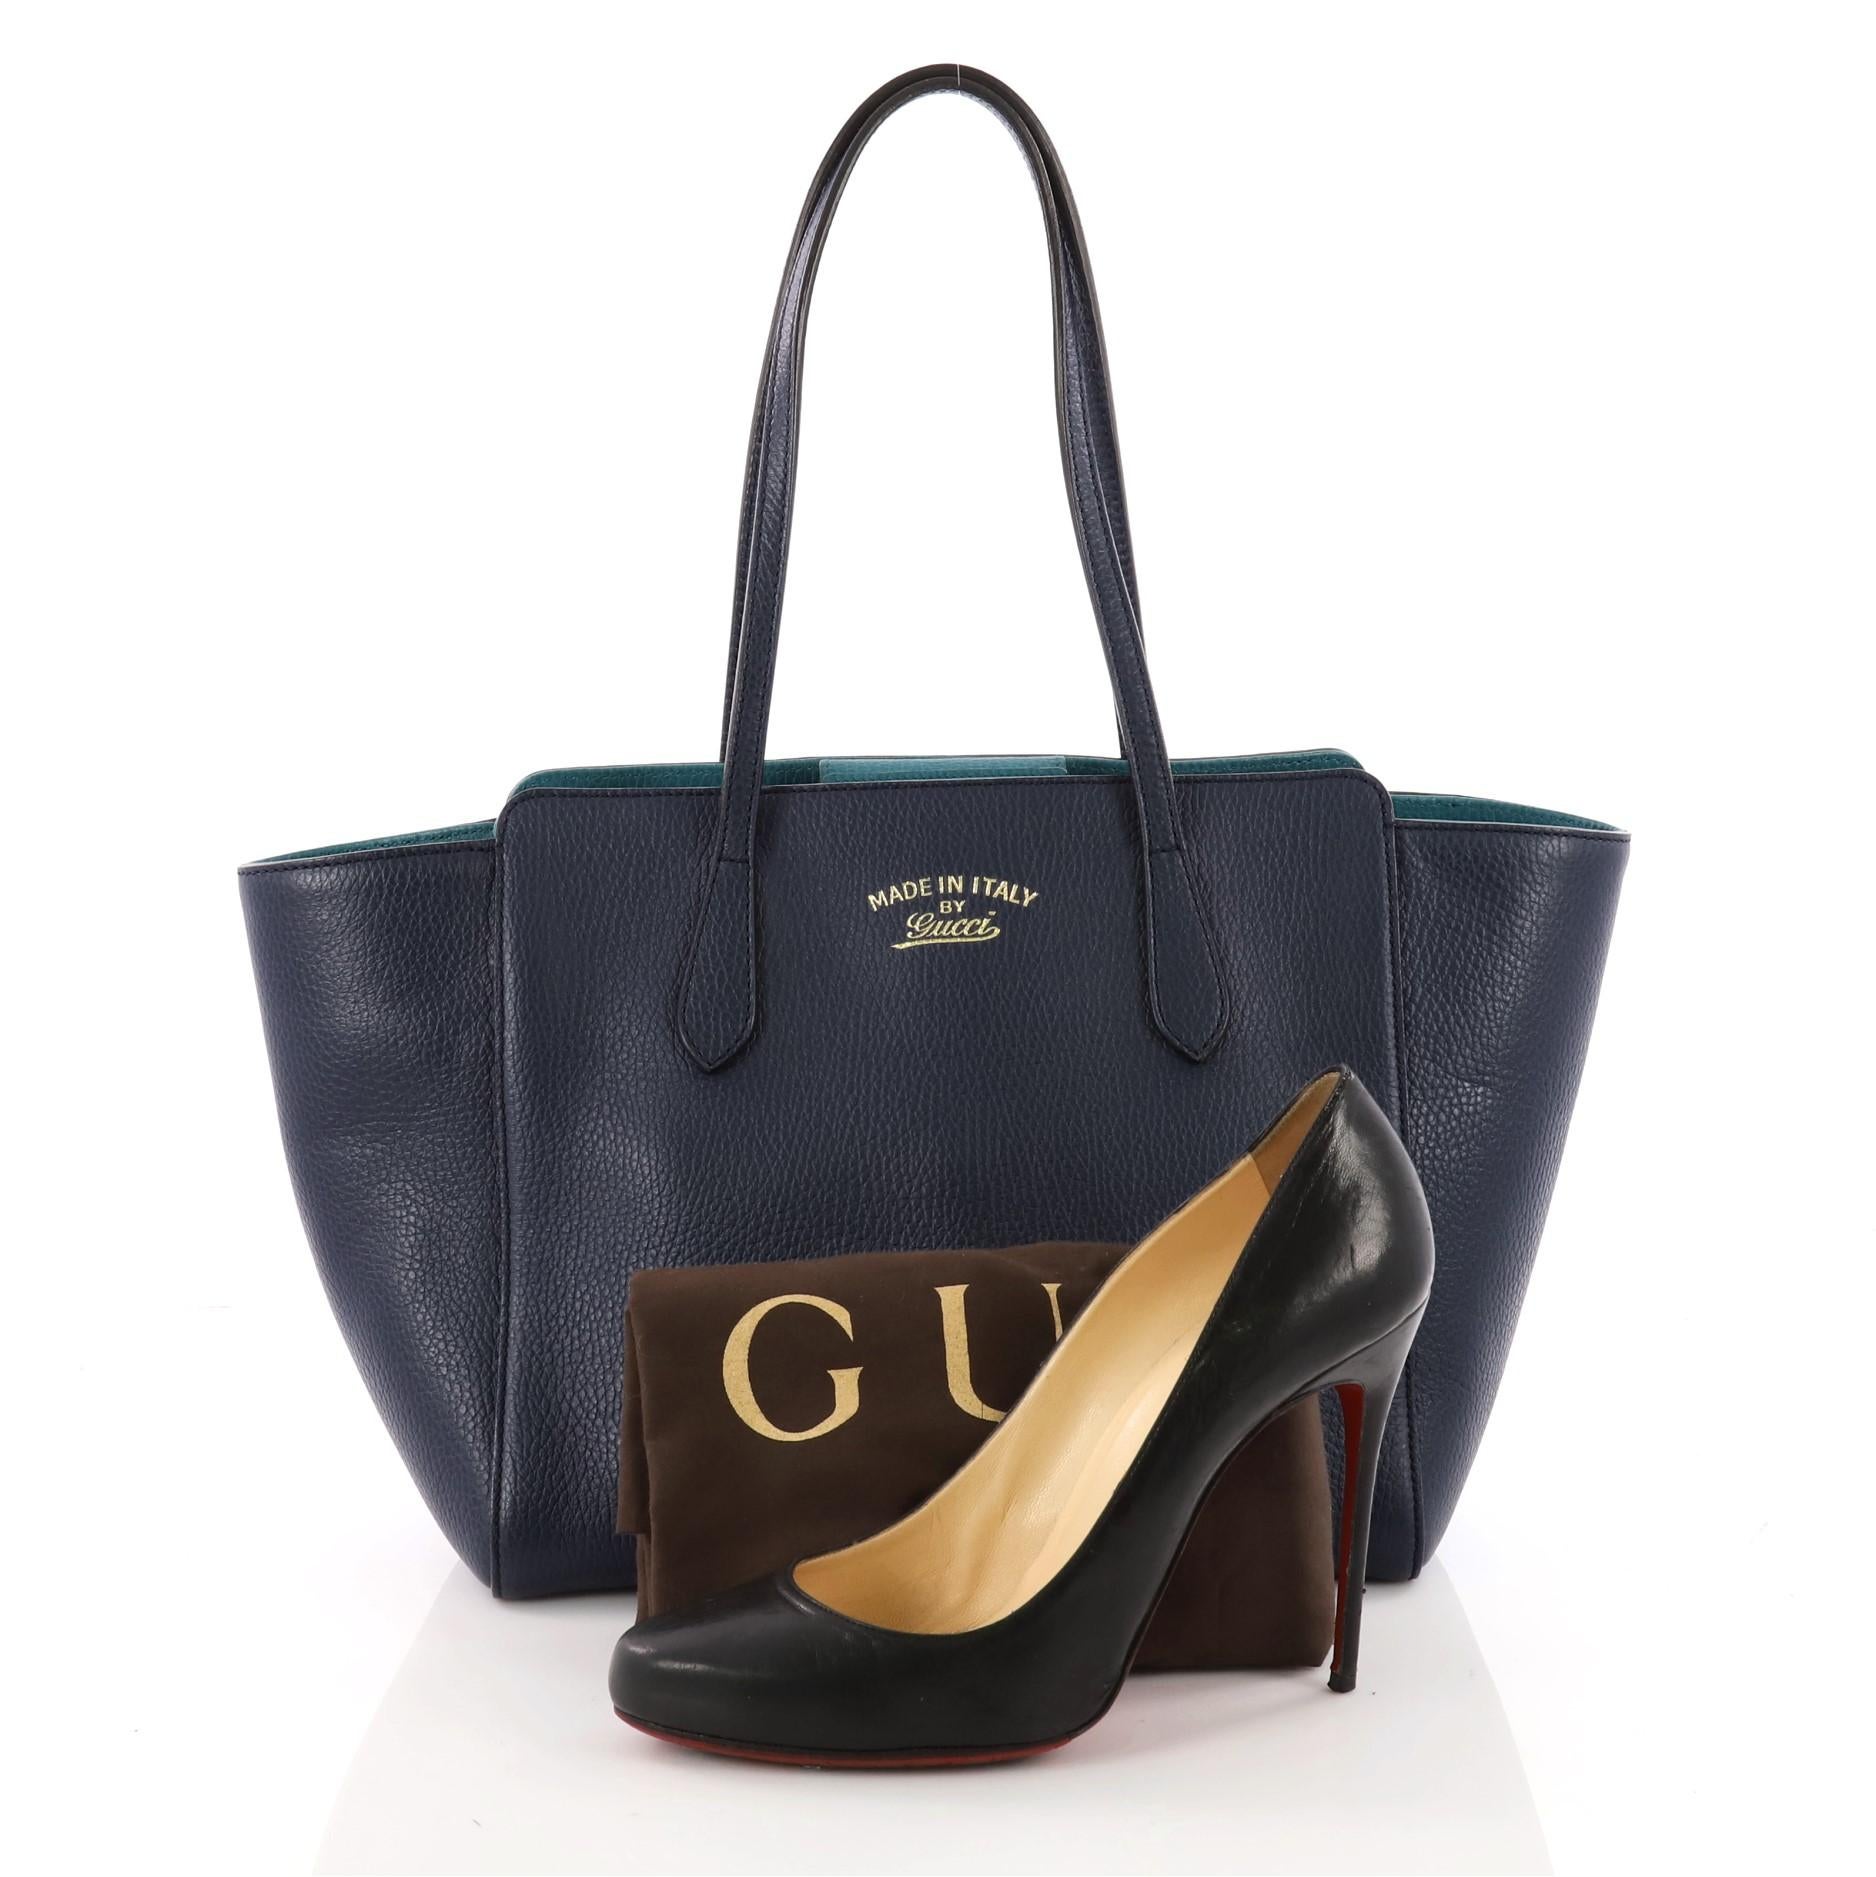 This authentic Gucci Swing Tote Leather Small is modern and sophisticated in design. Crafted in blue leather, this elegant tote features tall dual-slim handles, Gucci stamped logo at the front, expanded wing silhouette, and gold-tone hardware